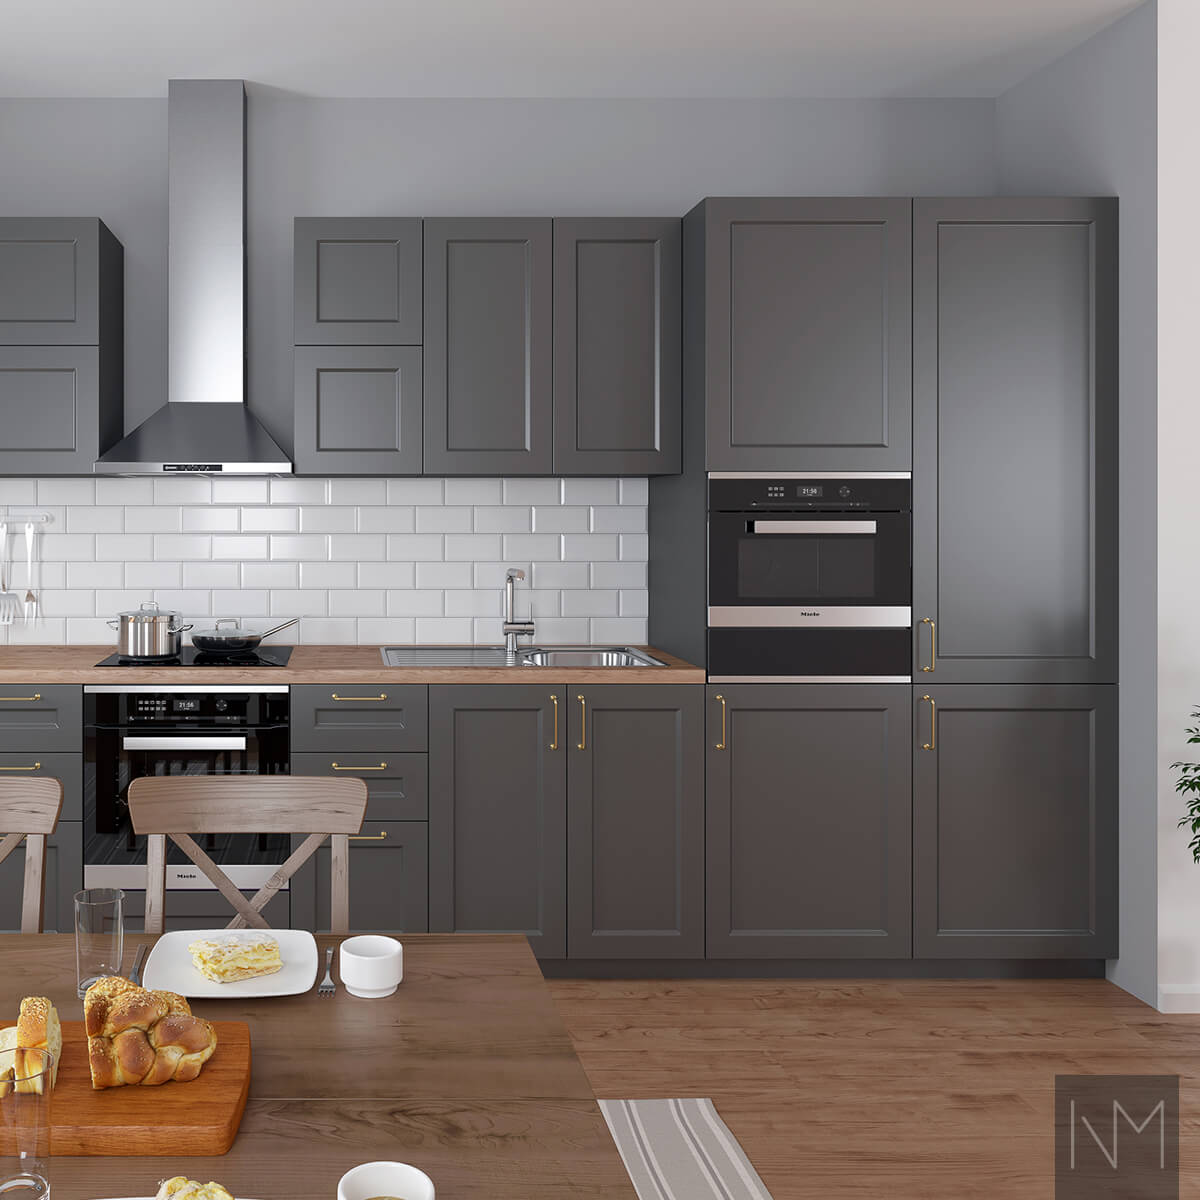 IKEA Metod or Faktum kitchen Classic. Colour NCS S-7500-N.